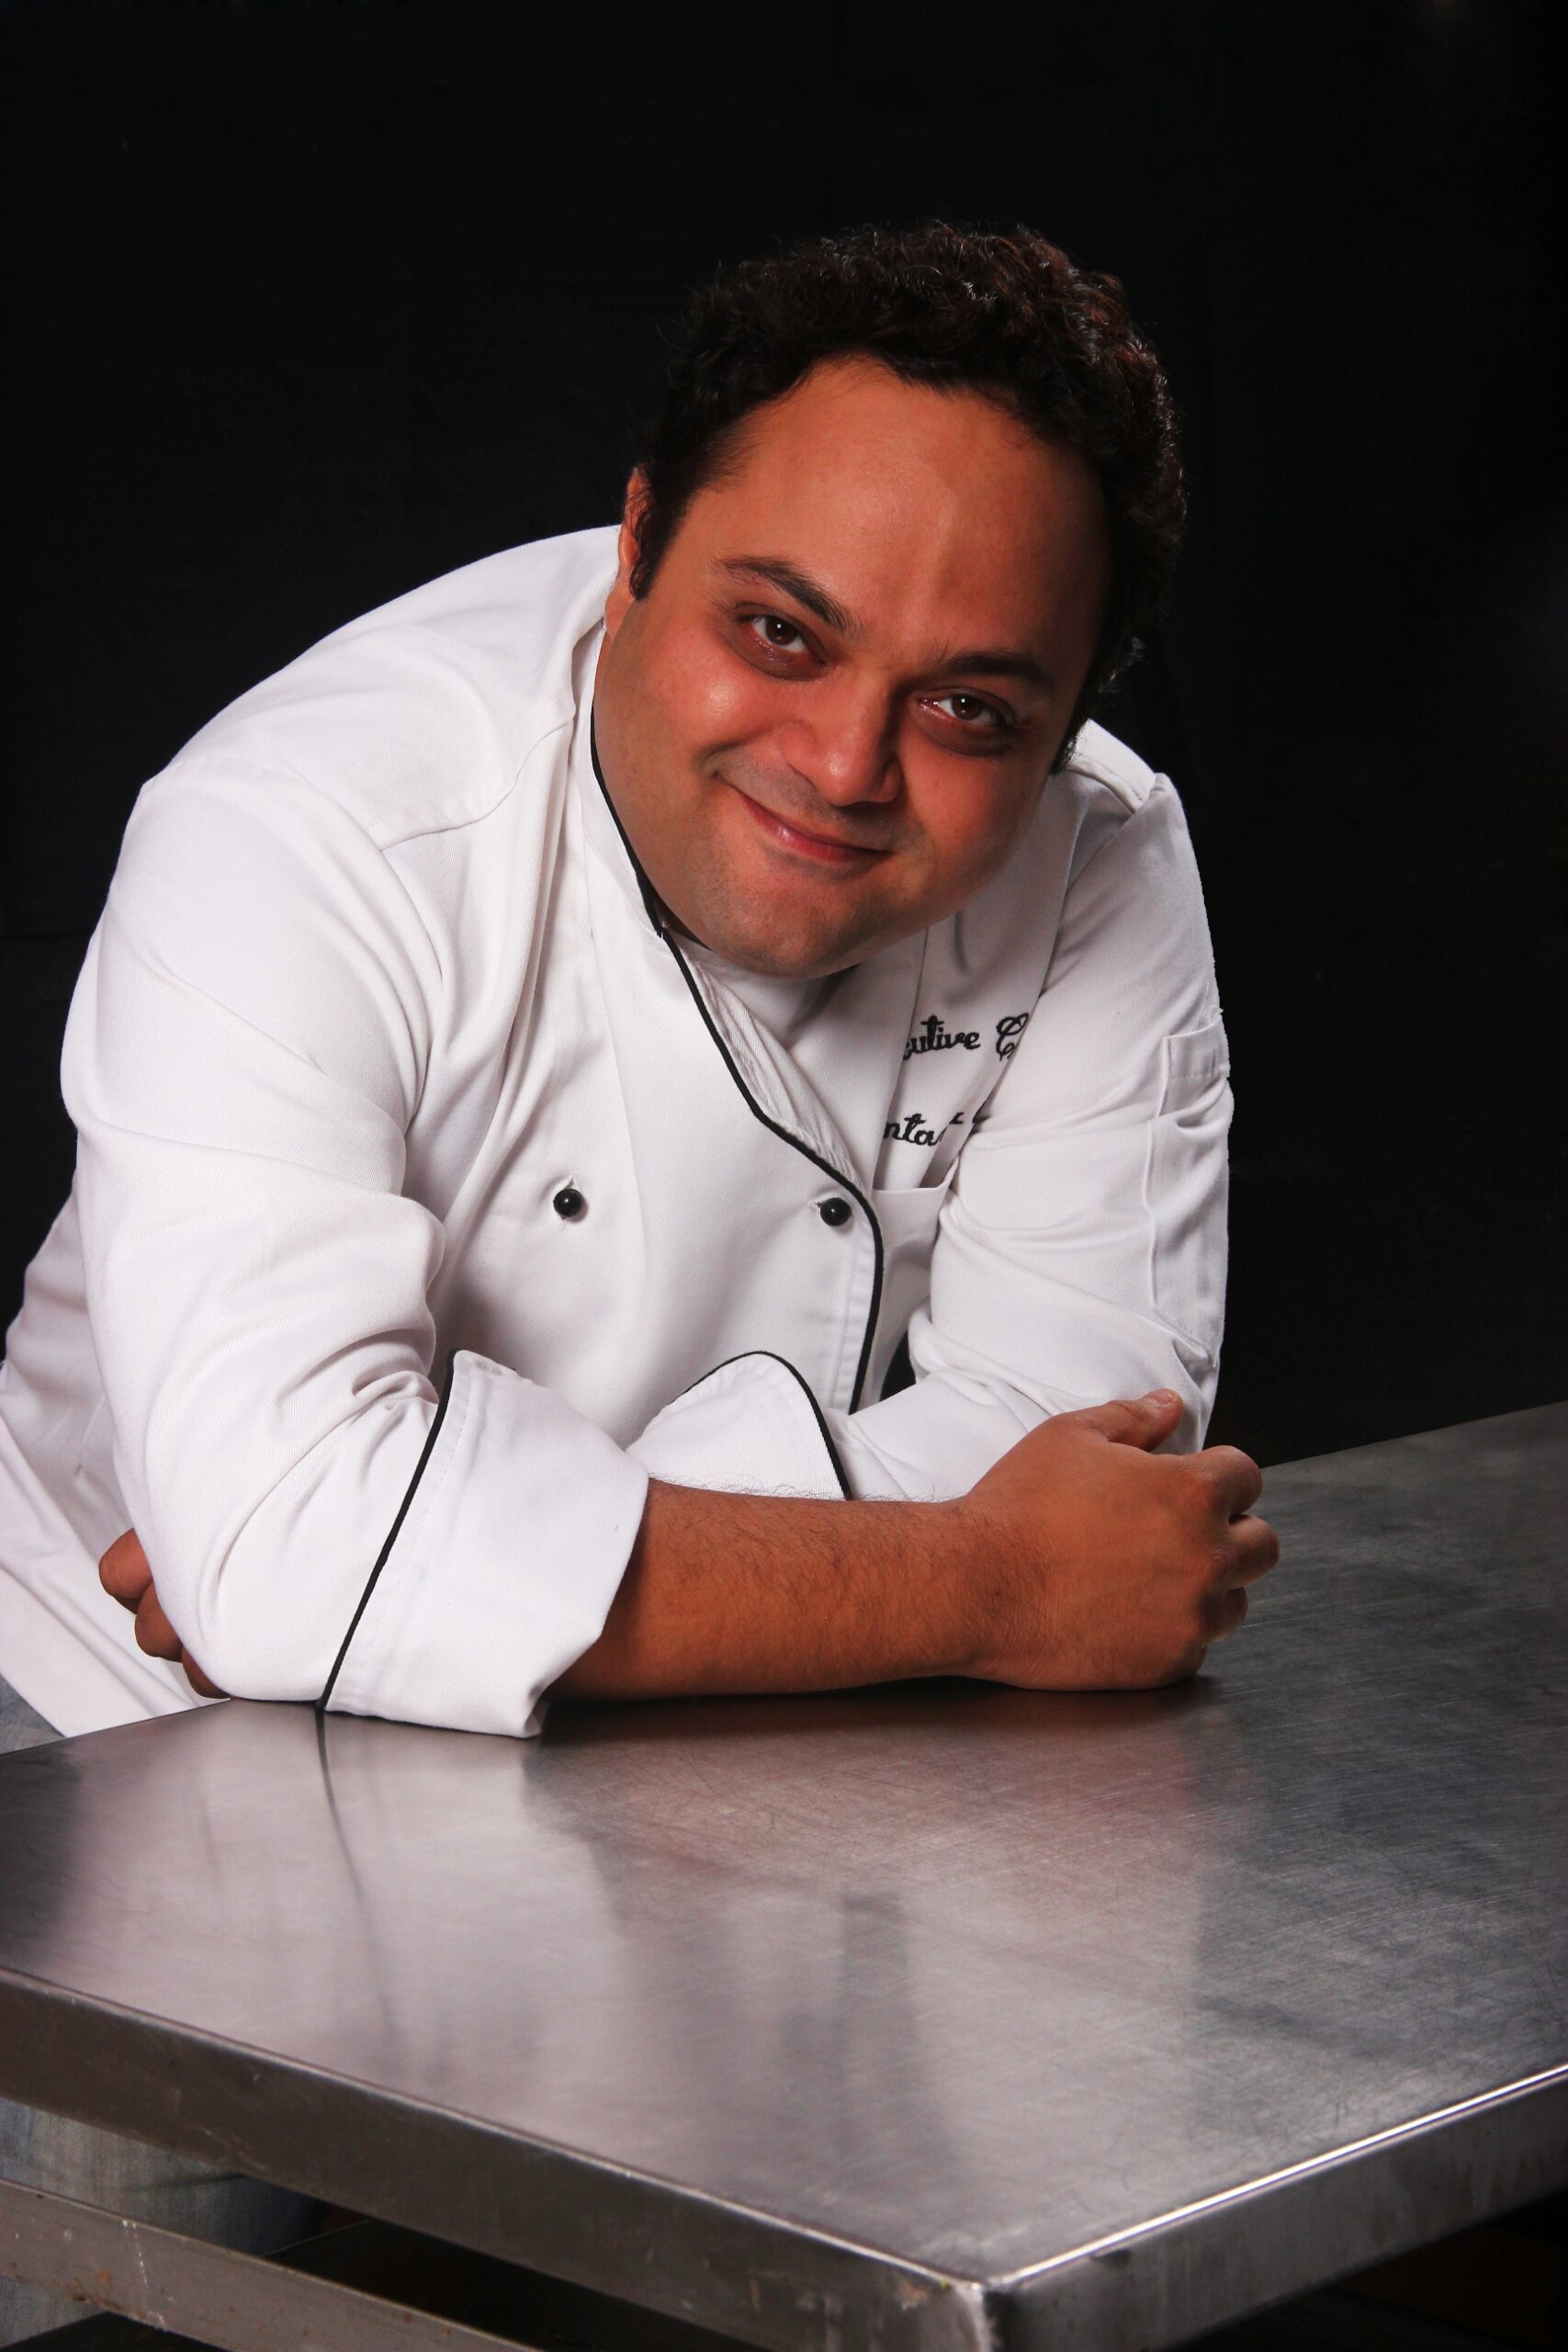 ‘Keeping up with the trends should be a chefs first priority’ : Chef Shantanu Gupte